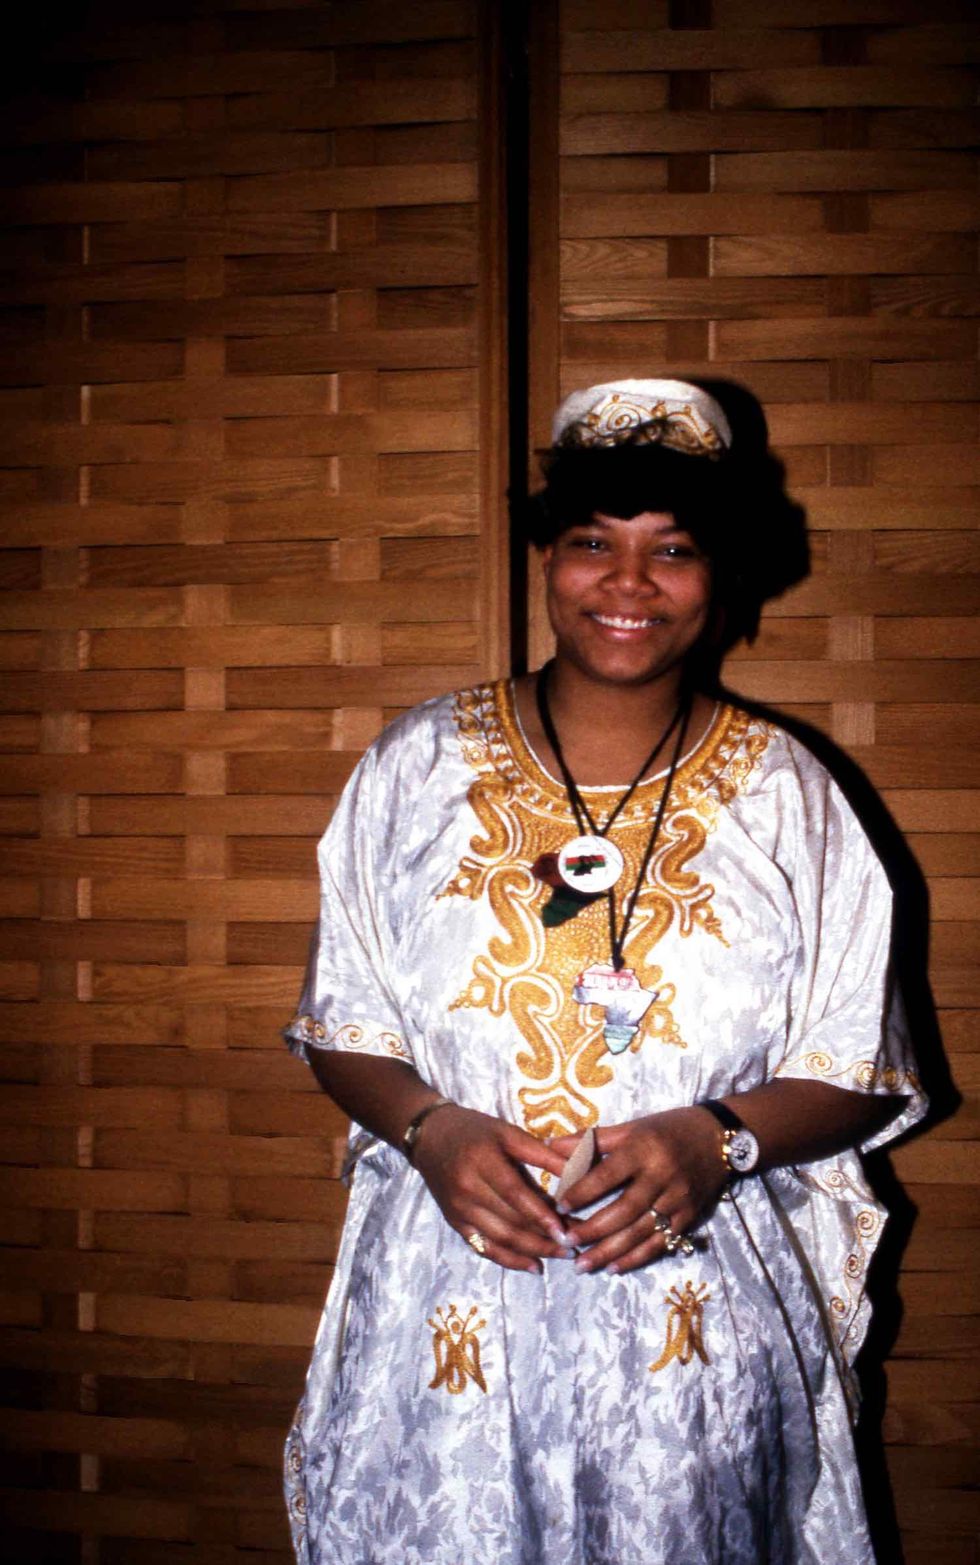 Rapper Queen Latifah (Dana Elaine Owens) poses for photos backstage at Mosque Maryum in Chicago, Illinois in June 1989.